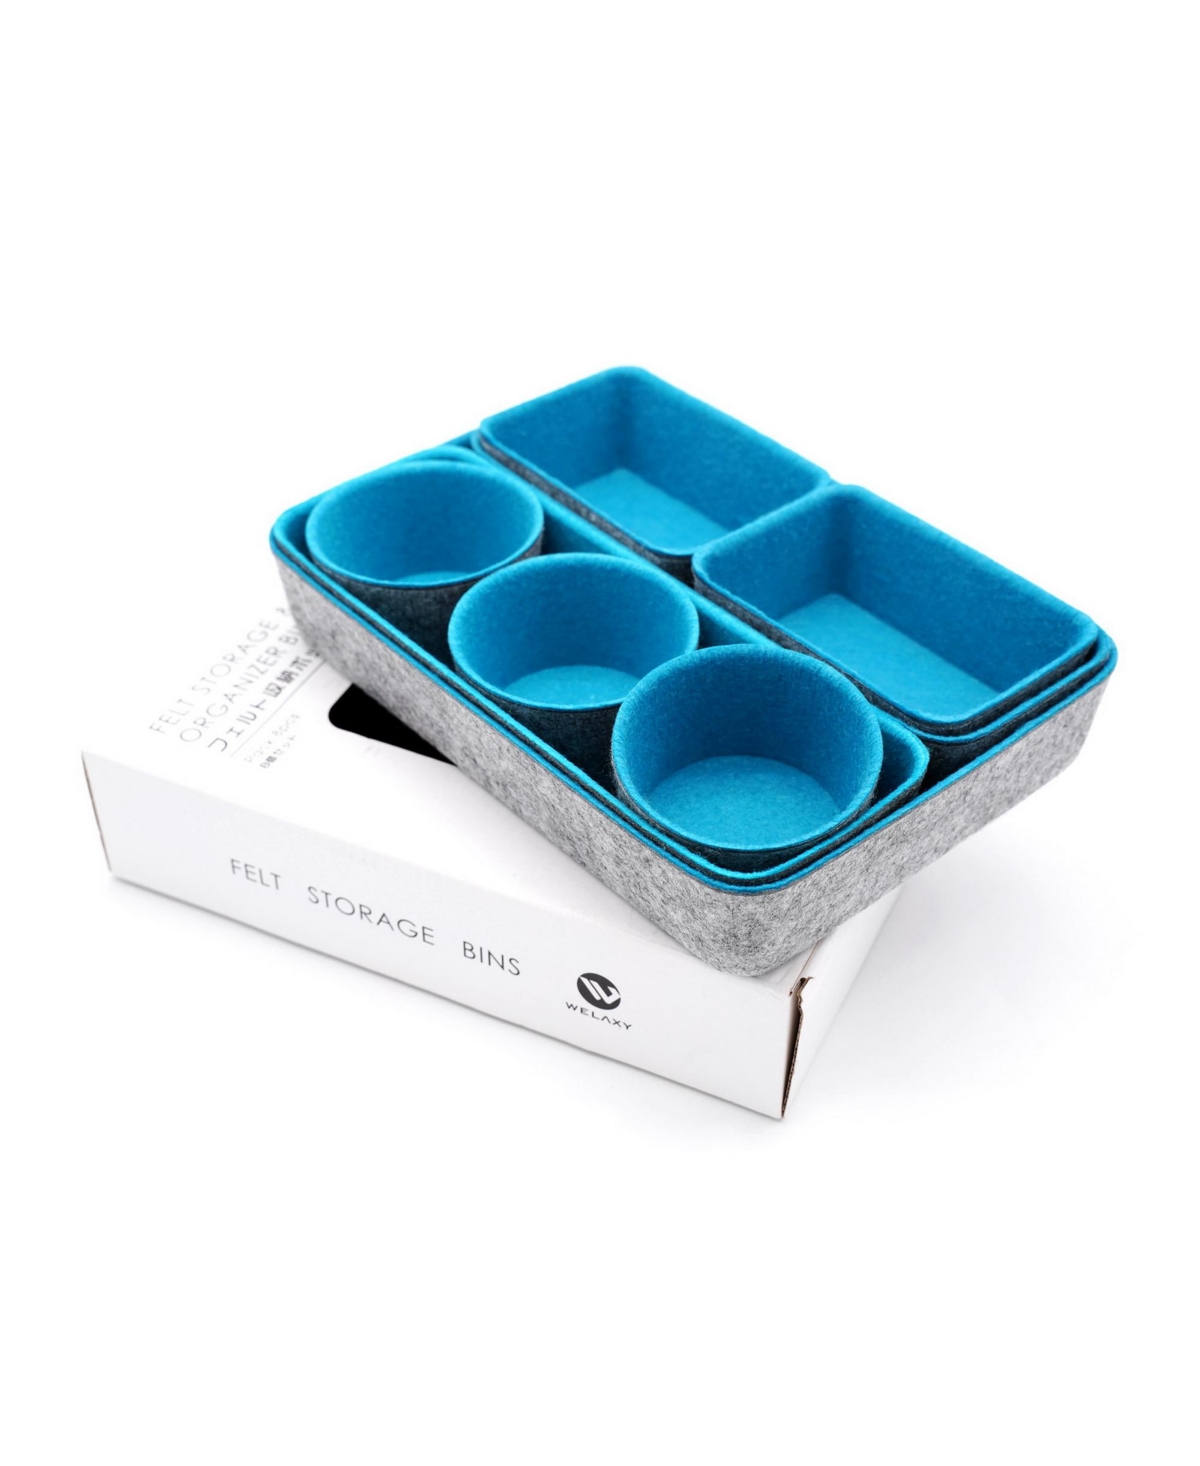 8 Piece Felt Drawer Organizer Set with Round Cups and Trays - Turquoise